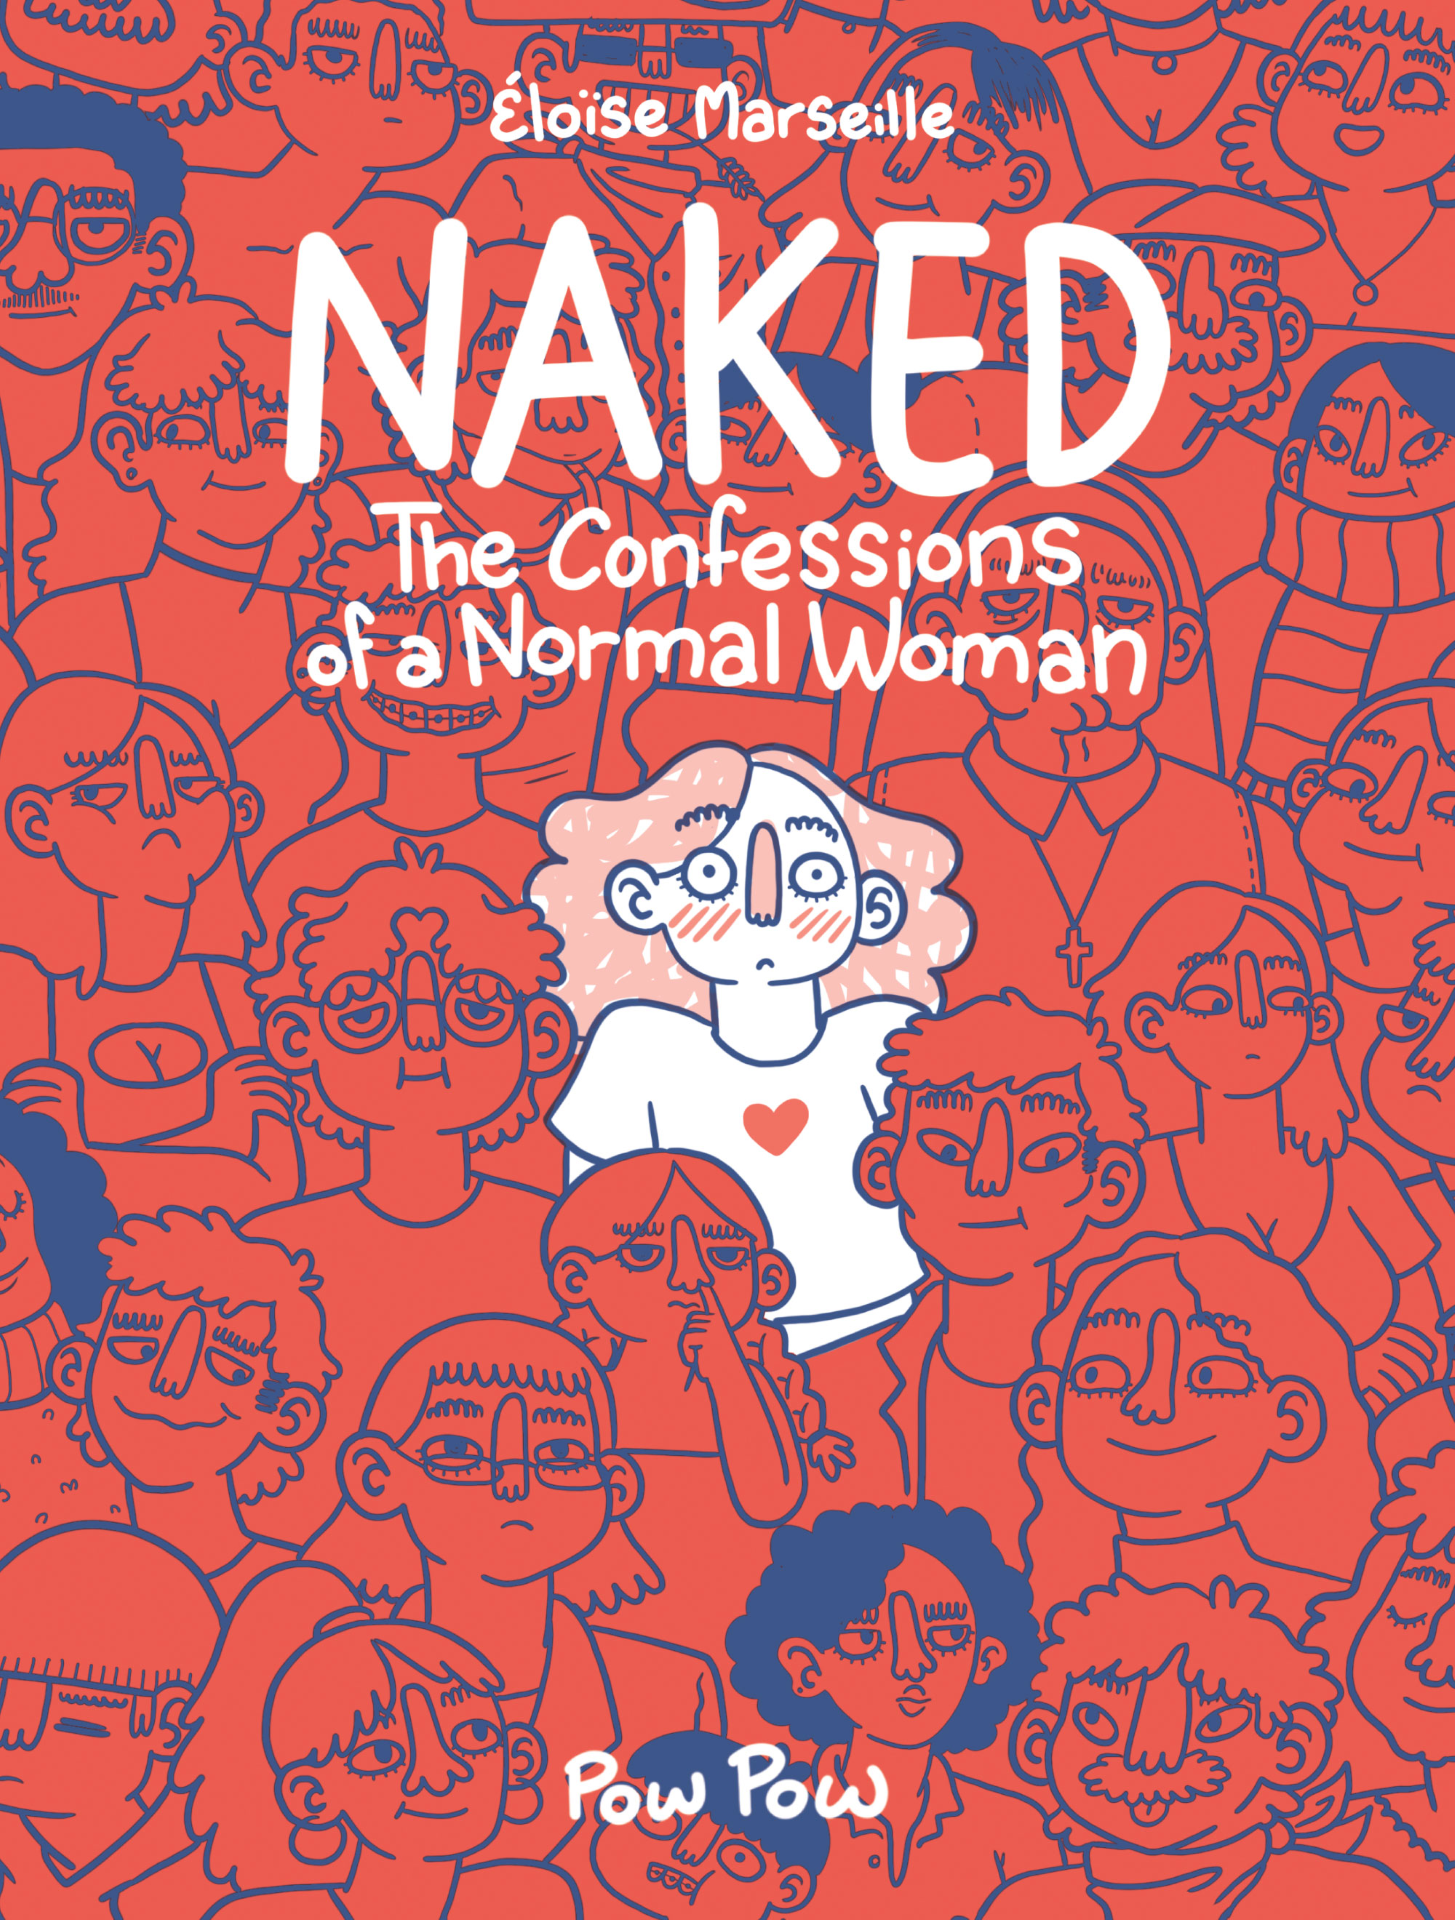 Book cover featuring cartoon-style illustrations of numerous characters in red hues with a central character highlighted, titled 'Naked: The Confessions of a Normal Woman' by Éloïse Marseille.